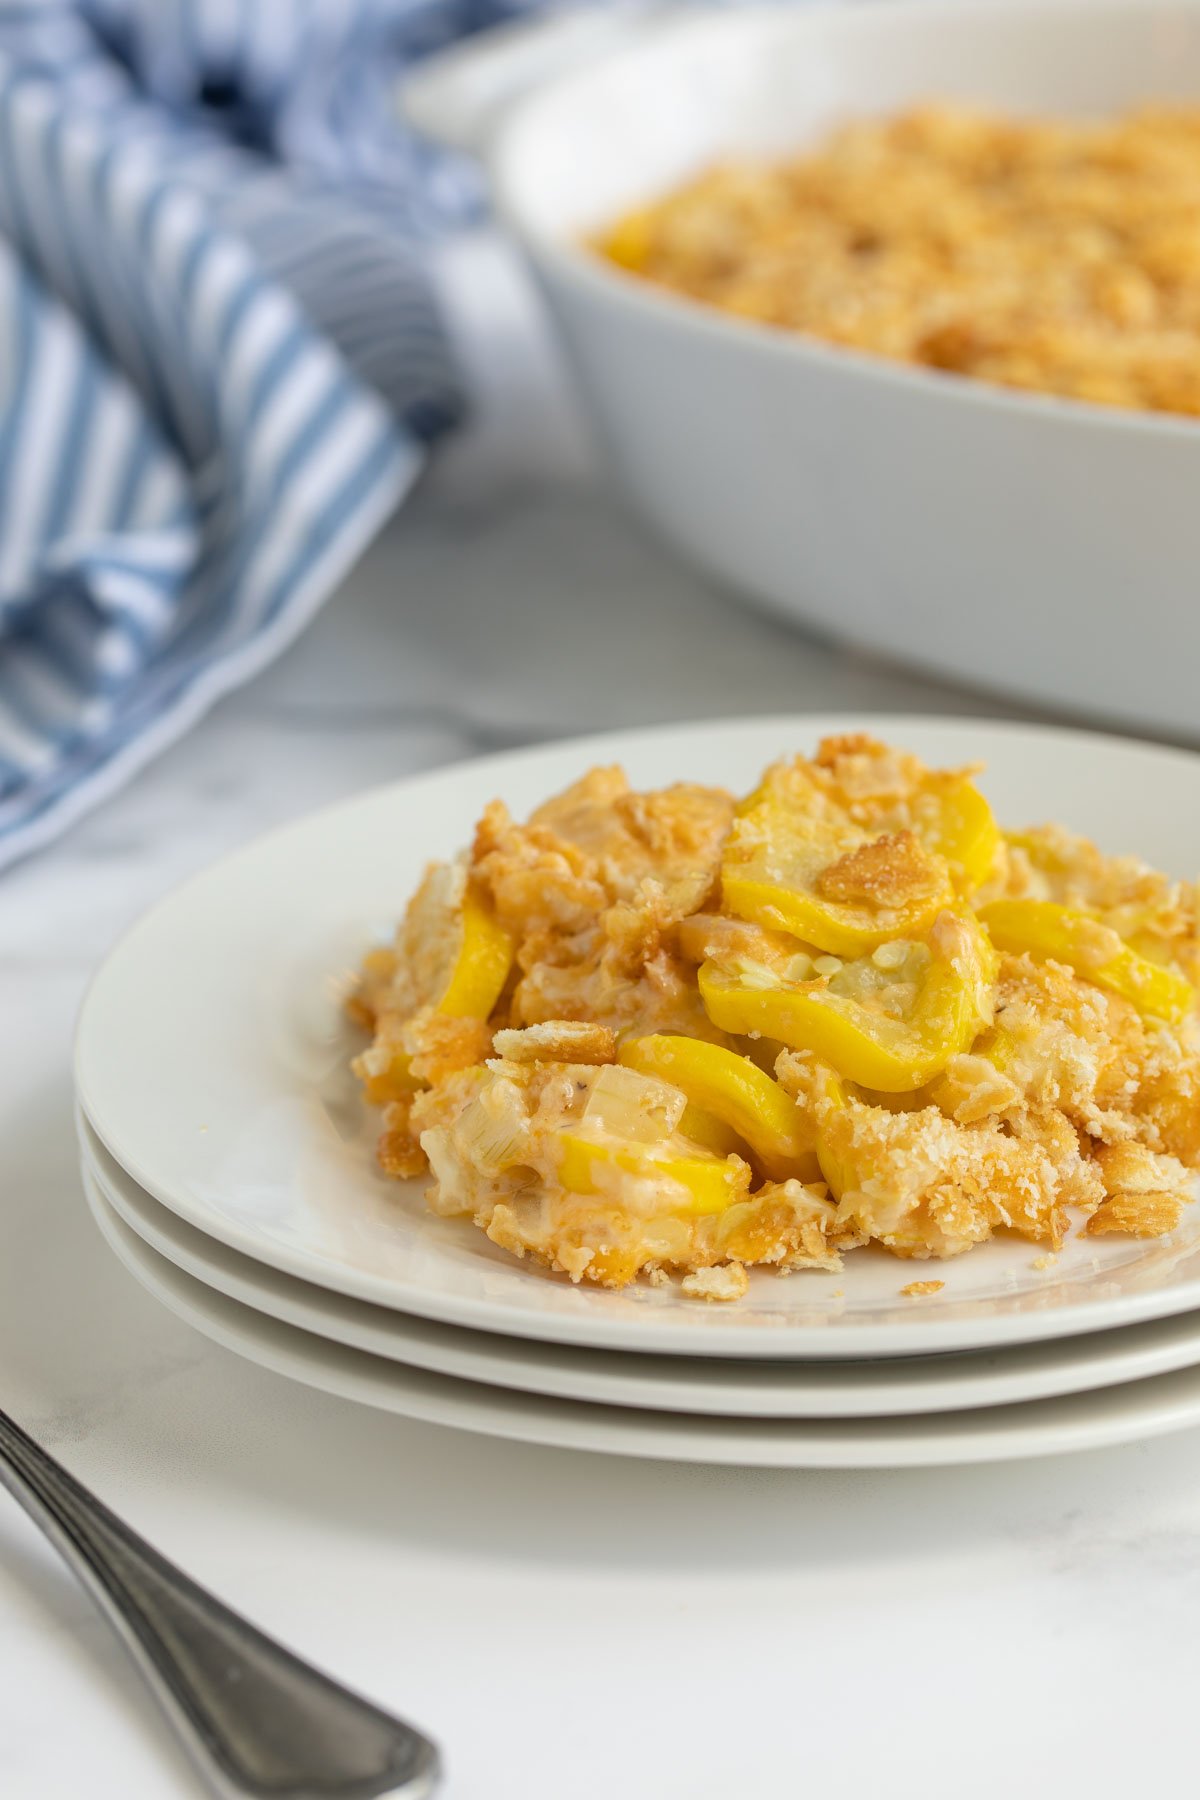 Cheesy squash casserole on a white plate with a baking dish in the background.